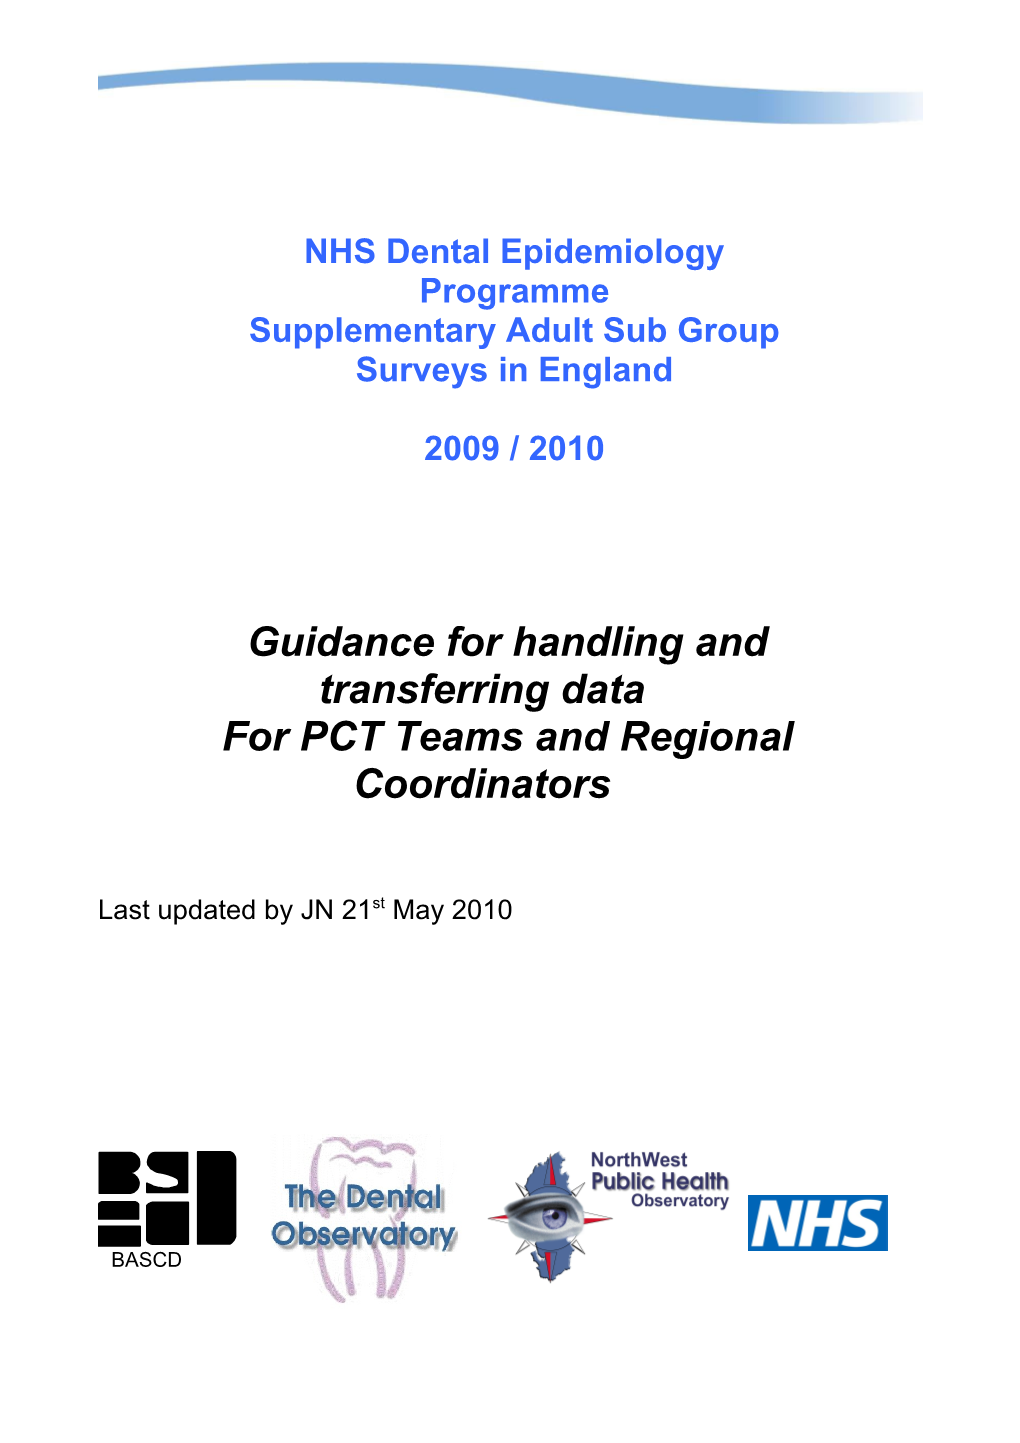 NHS Dental Epidemiological Oral Health Survey of 5-Year-Old Children in England